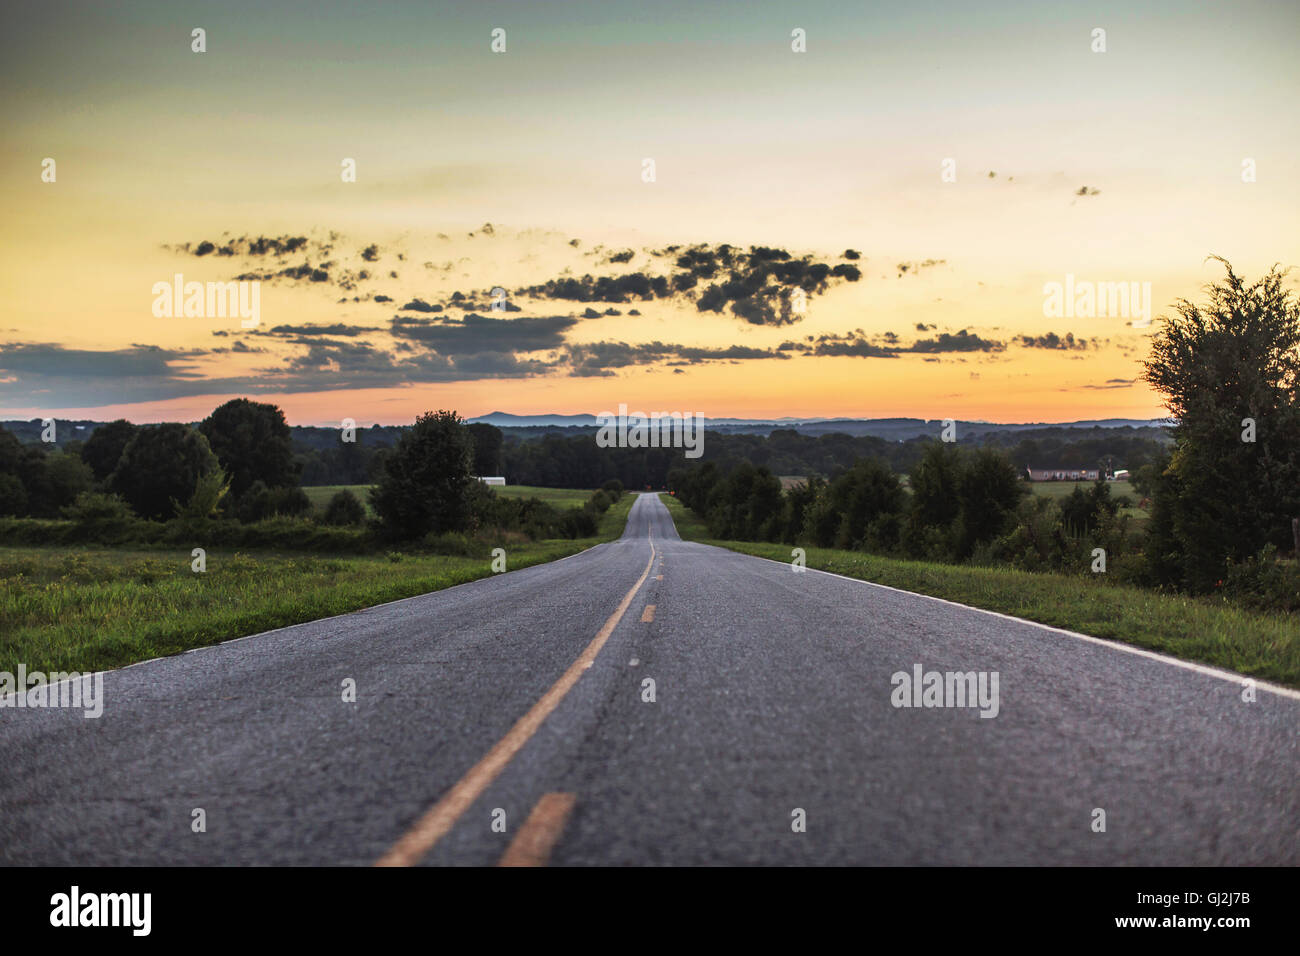 Diminishing perspective of rural road at sunset Stock Photo